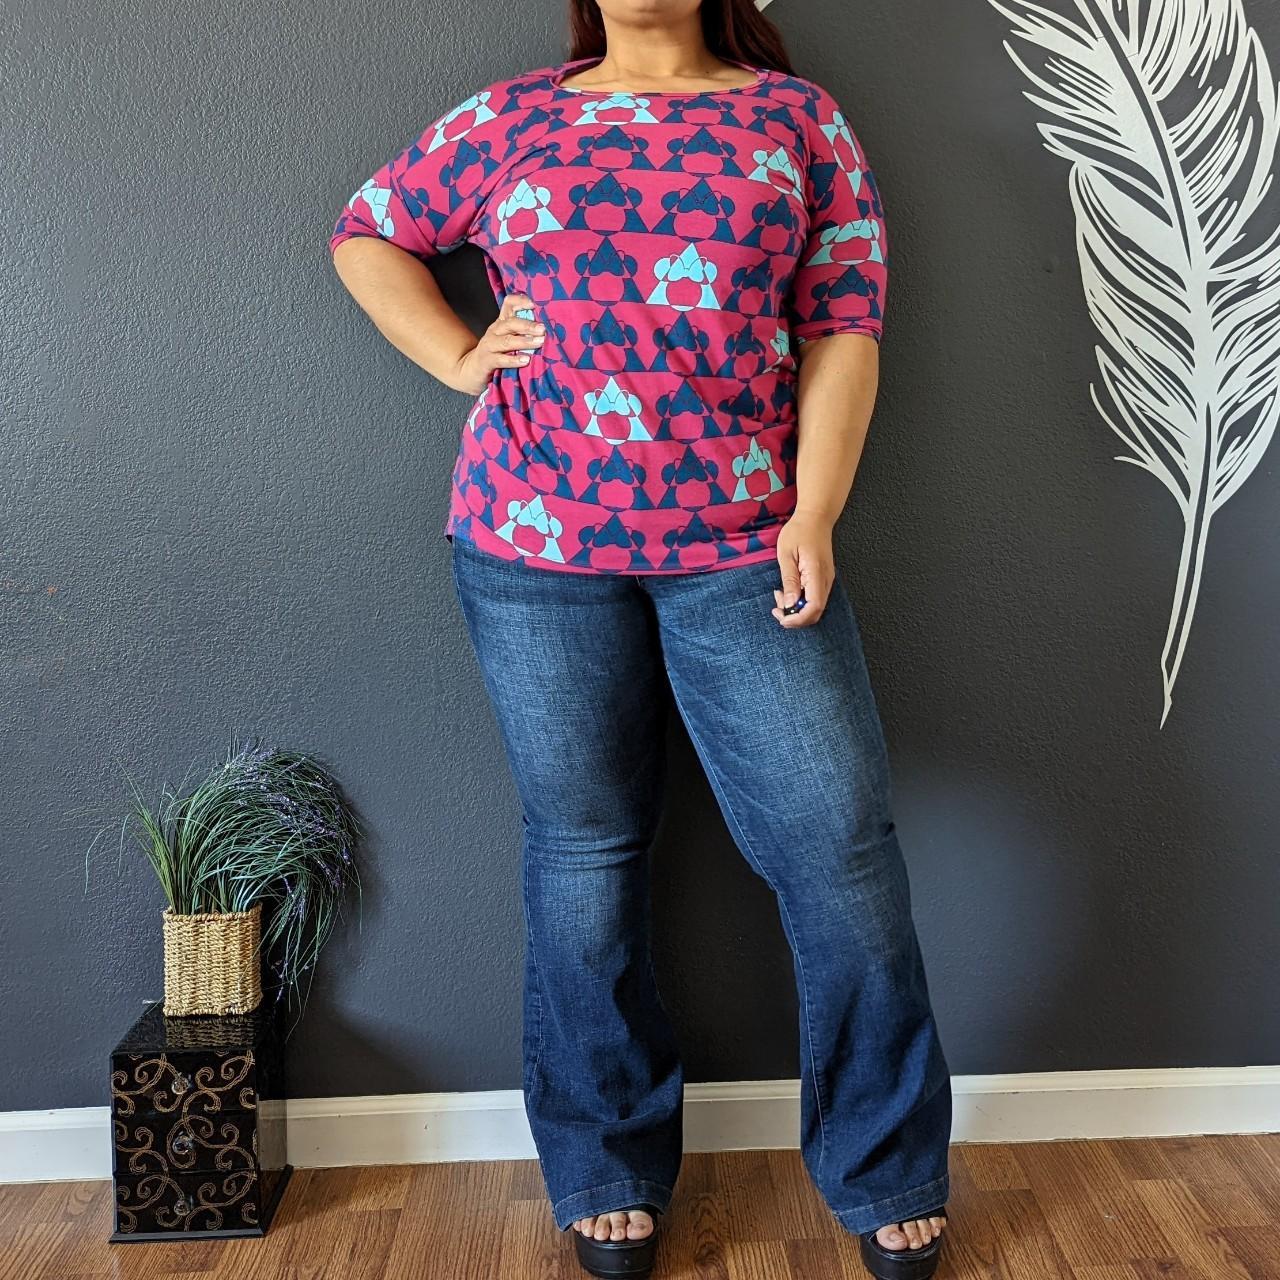 LuLaRoe Minnie Mouse Top Sooo cute, great for a - Depop